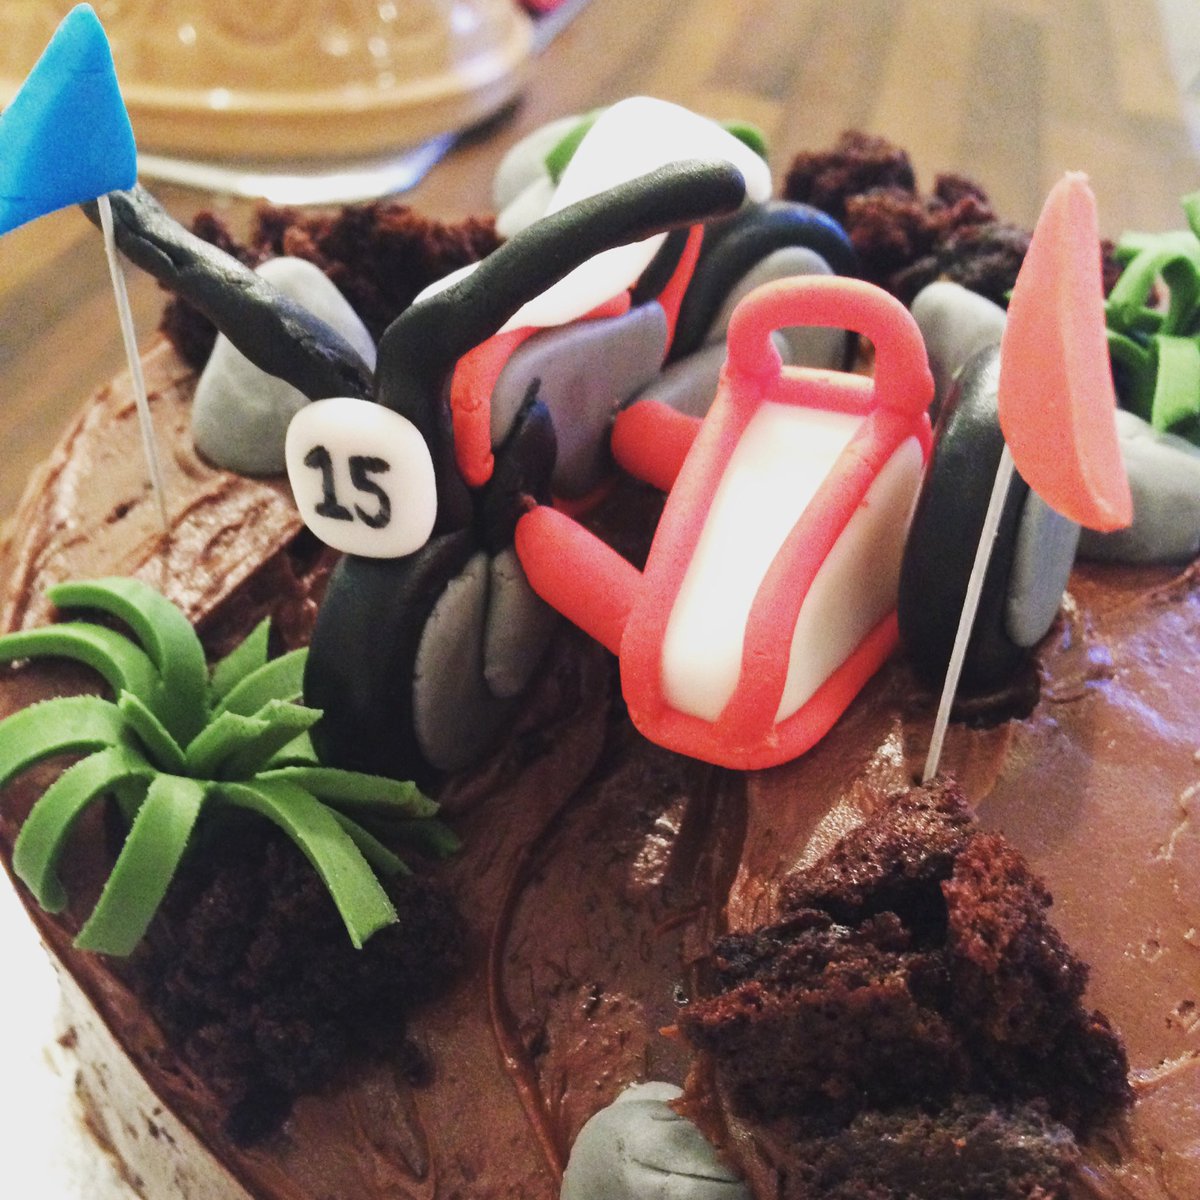 Trials bike and sidecar chocolate cake for a special gentleman's birthday #trialsbike #trials #sidecar #chocolate #cake #katesbakesiom